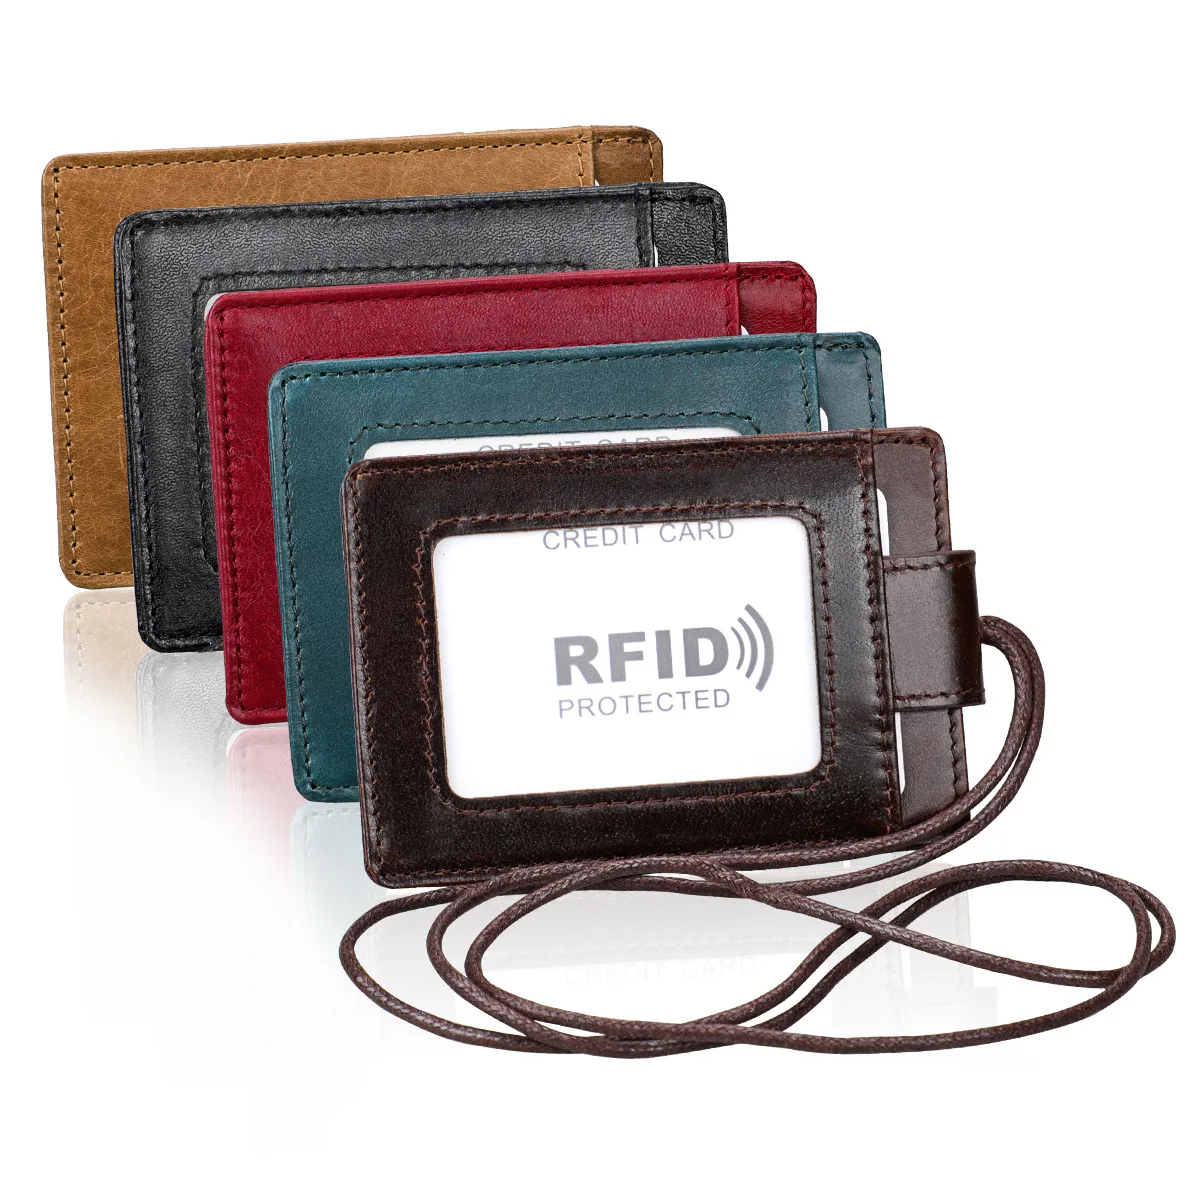 New Business Card Cover with Rope RFID Genuine Leather Employee Work Card Cover Multifunctional Plate Chest Card NFC for Student